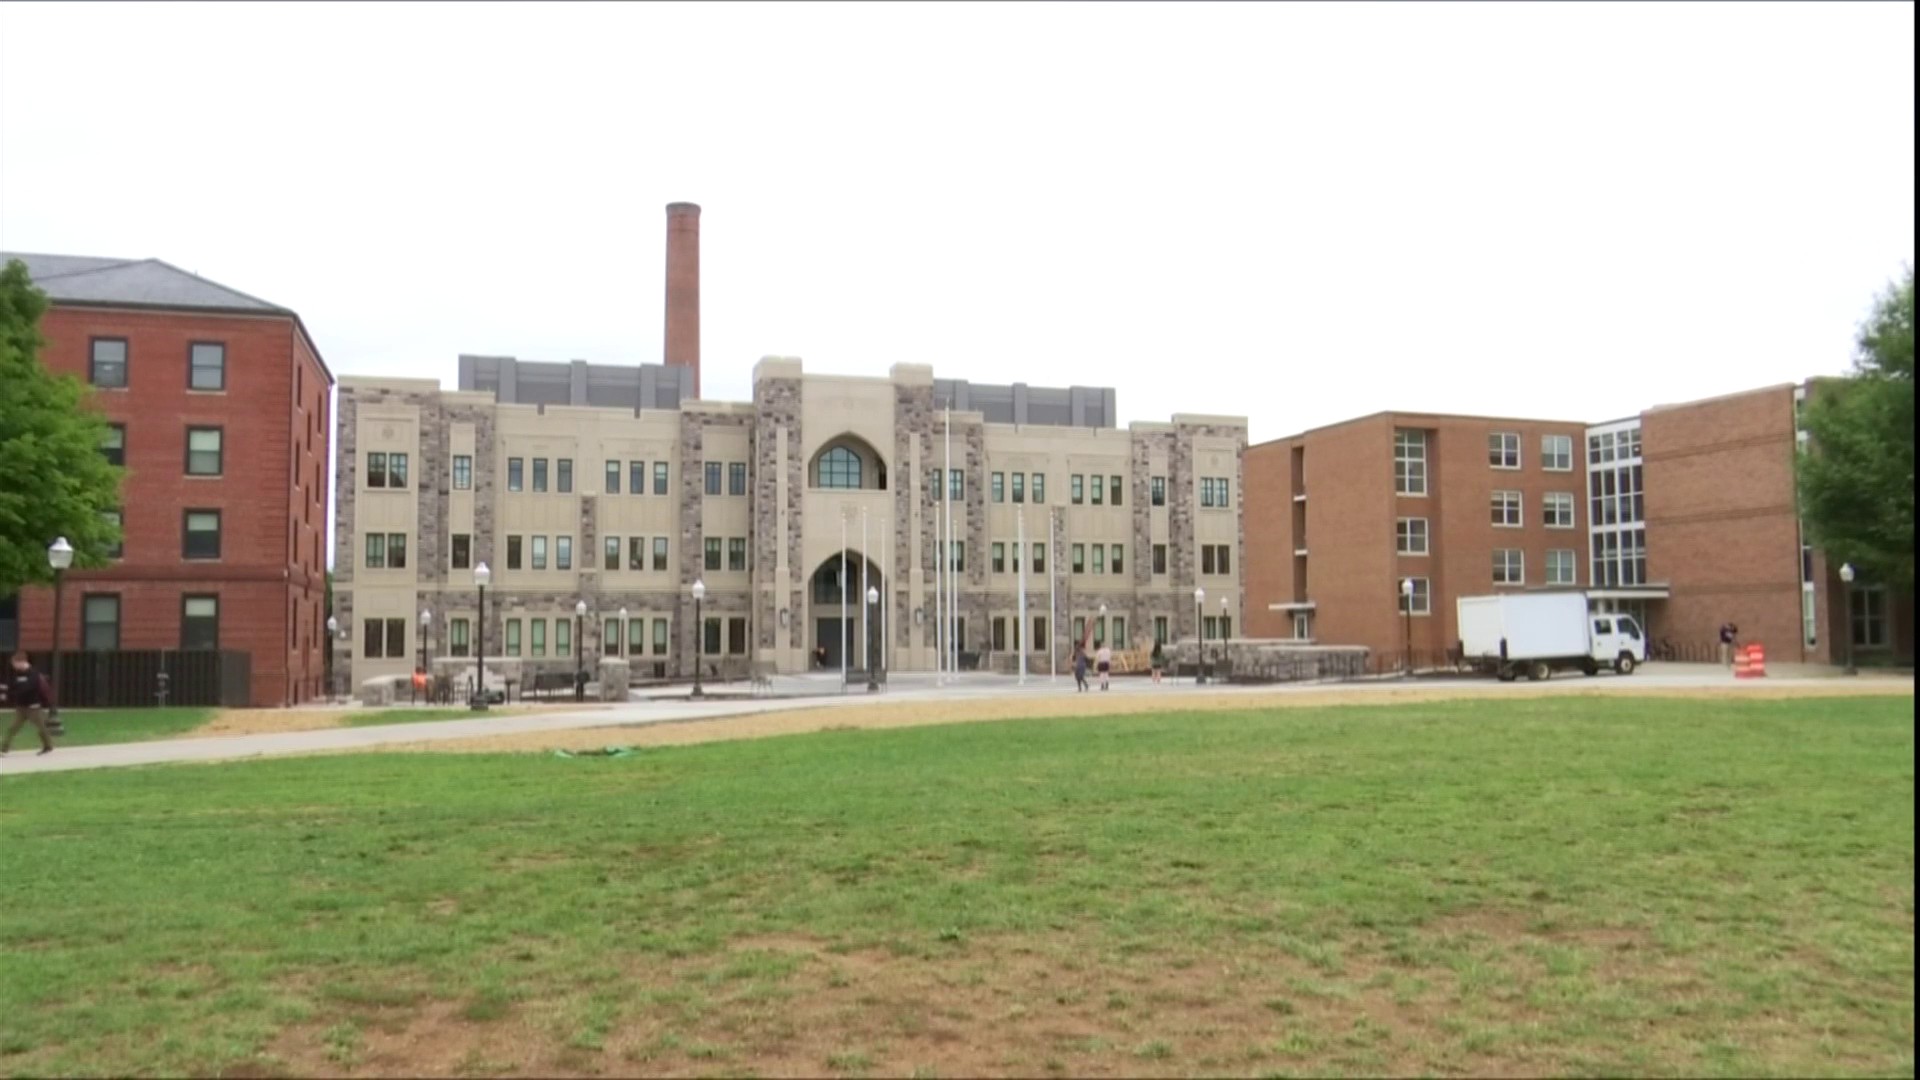 New Corps leadership and military science building at Virginia Tech